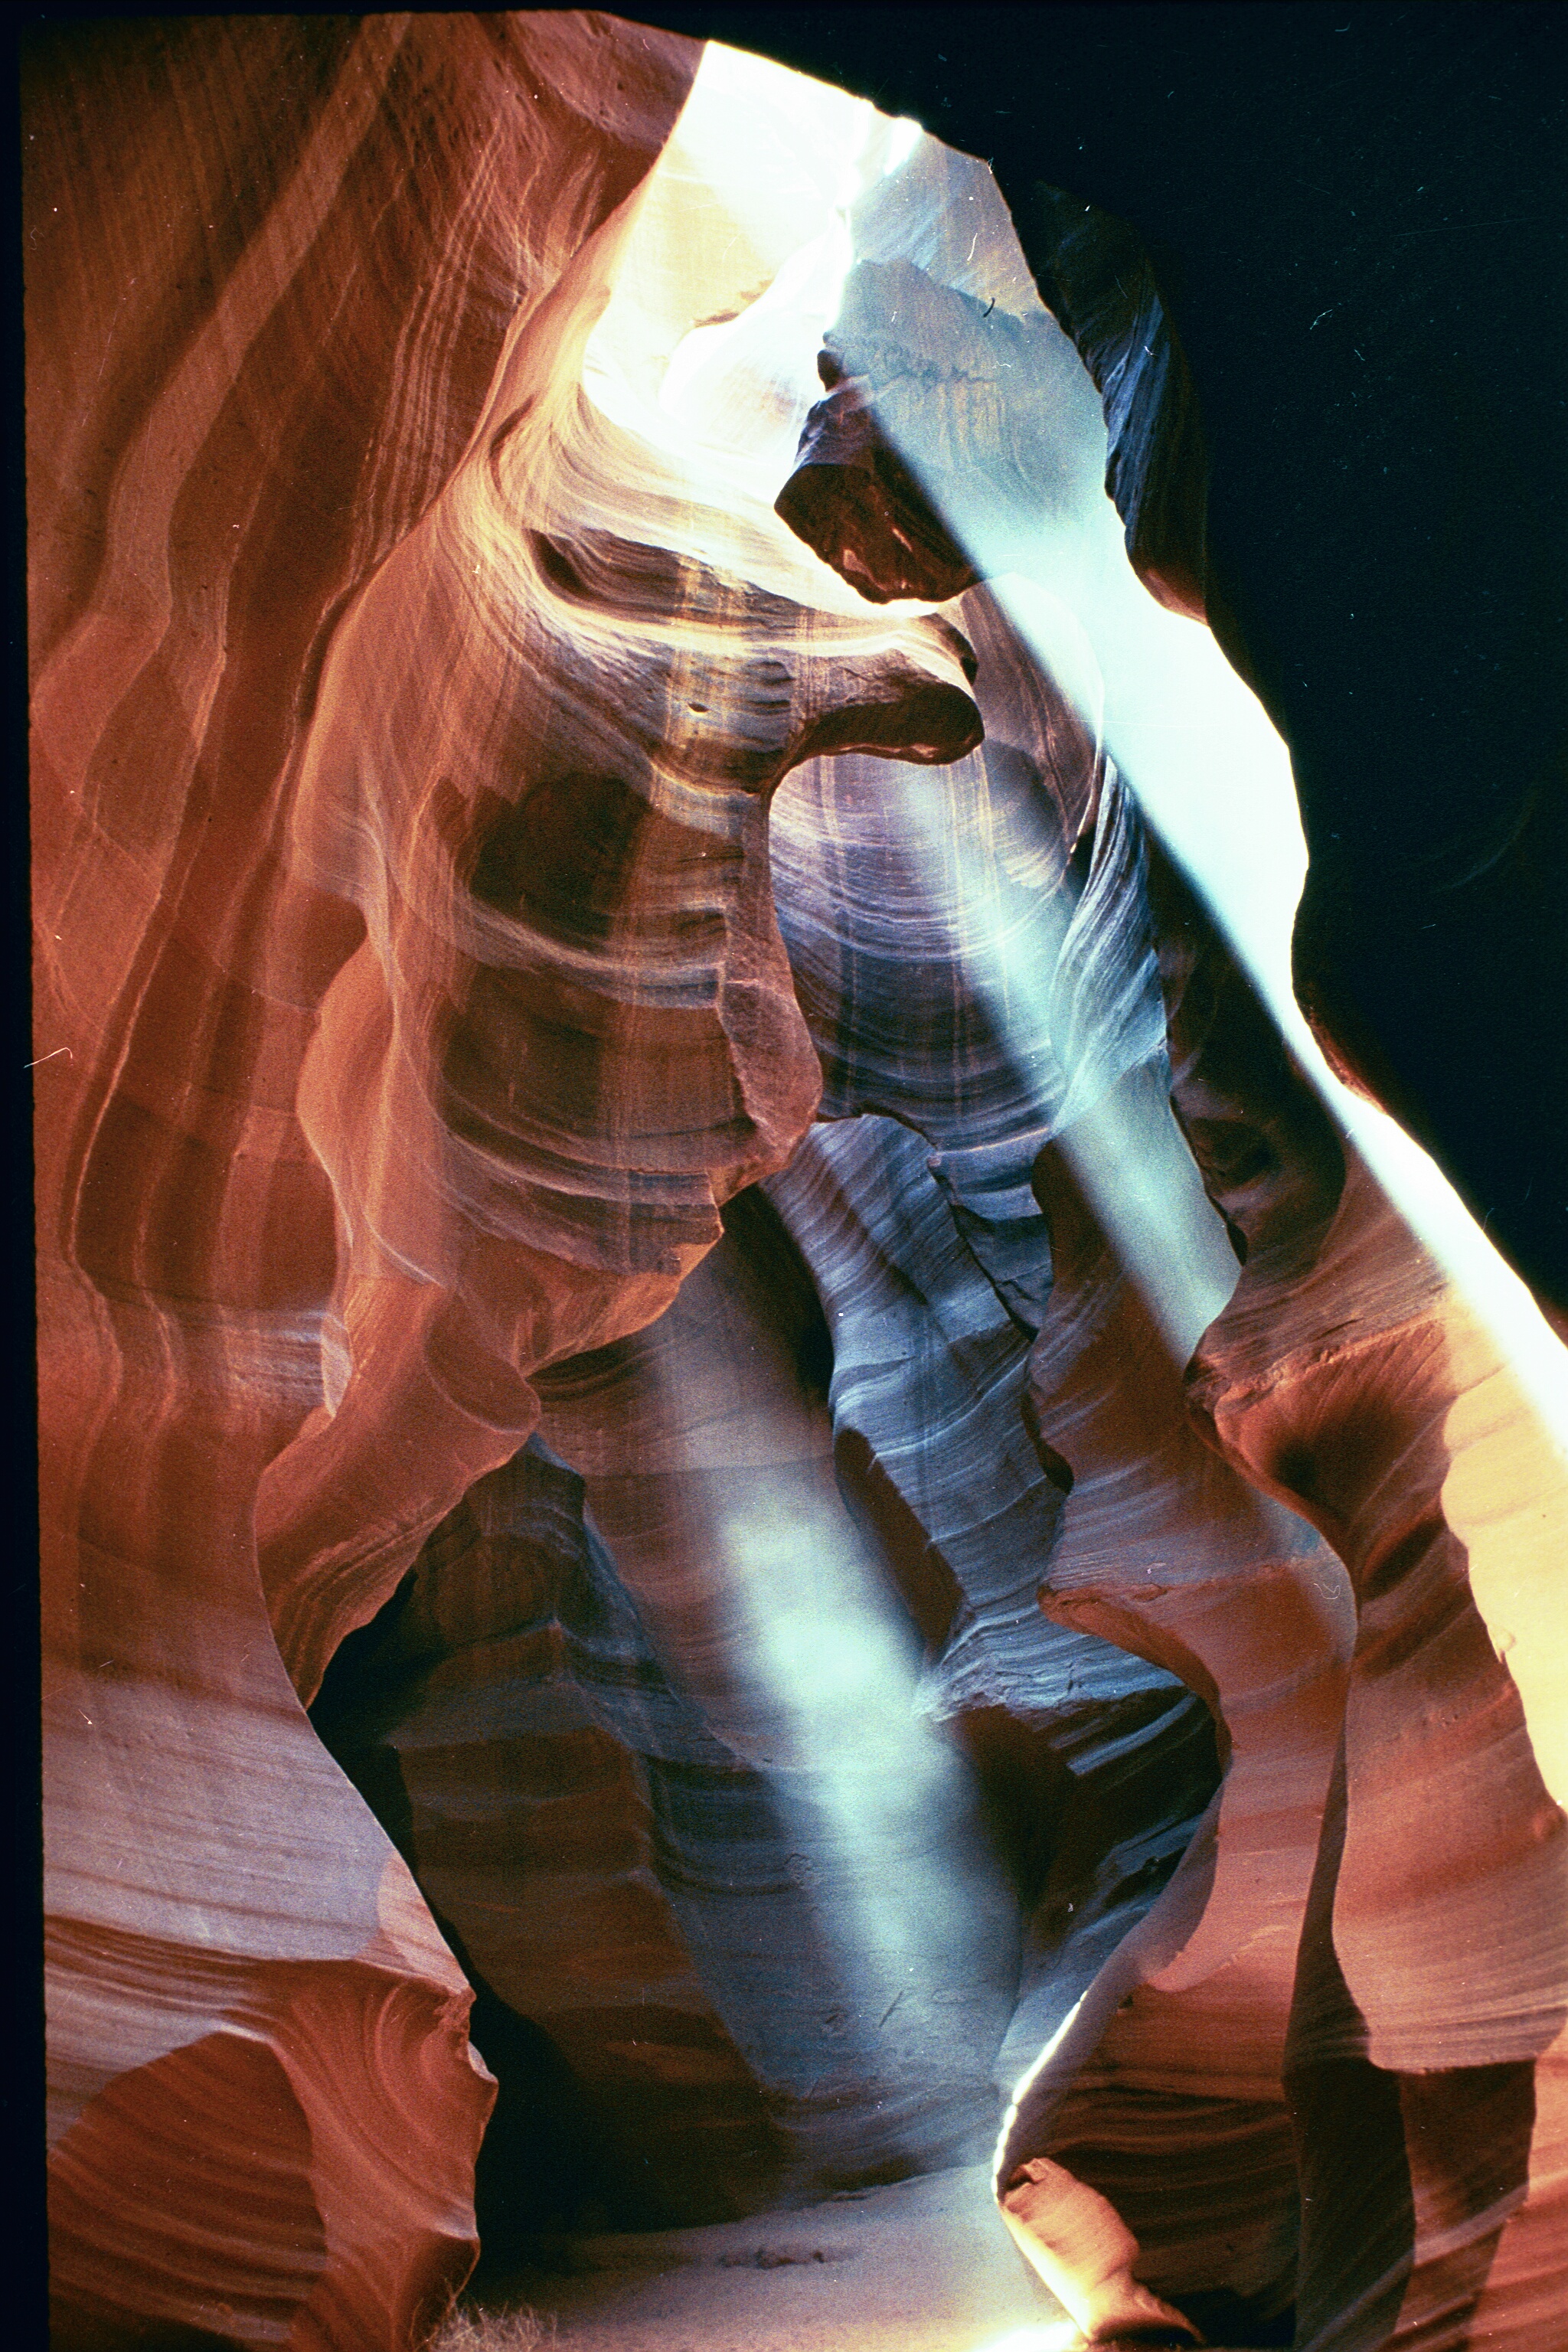 When you fly in to Page you might want to book a Navajo-guided tour of Antelope Canyon, the slot canyon you’ve seen in numerous photos. Shafts of sunlight penetrate into Lower Antelope Canyon on many days of the year. Photo courtesy Carolene Ekis, Antelope Canyon Tours.